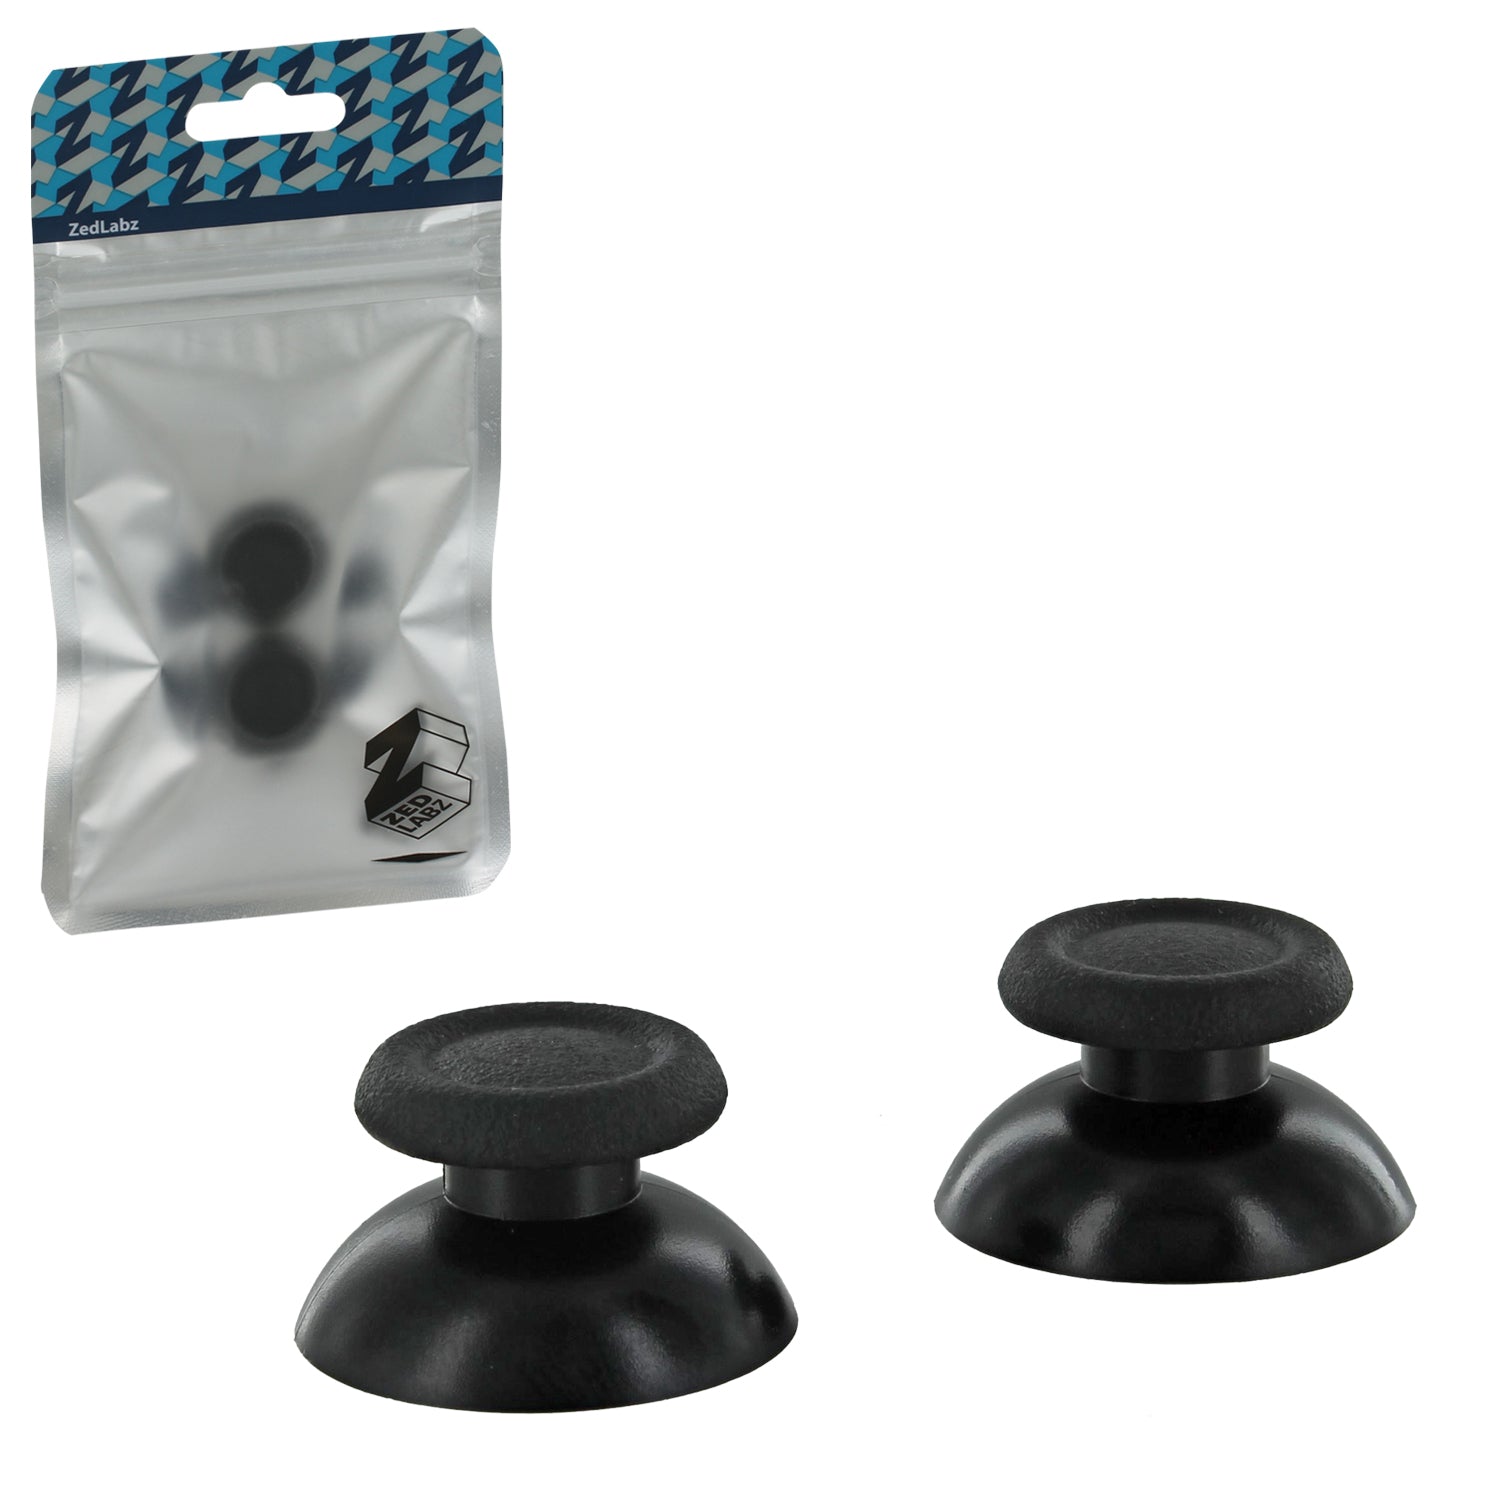 https://www.zedlabz.com/cdn/shop/products/thumbsticks-for-ps4-controllers-oem-replacement-analog-rubber-grip-stick-2-pack-black-zedlabz400114-326514.jpg?v=1650197210